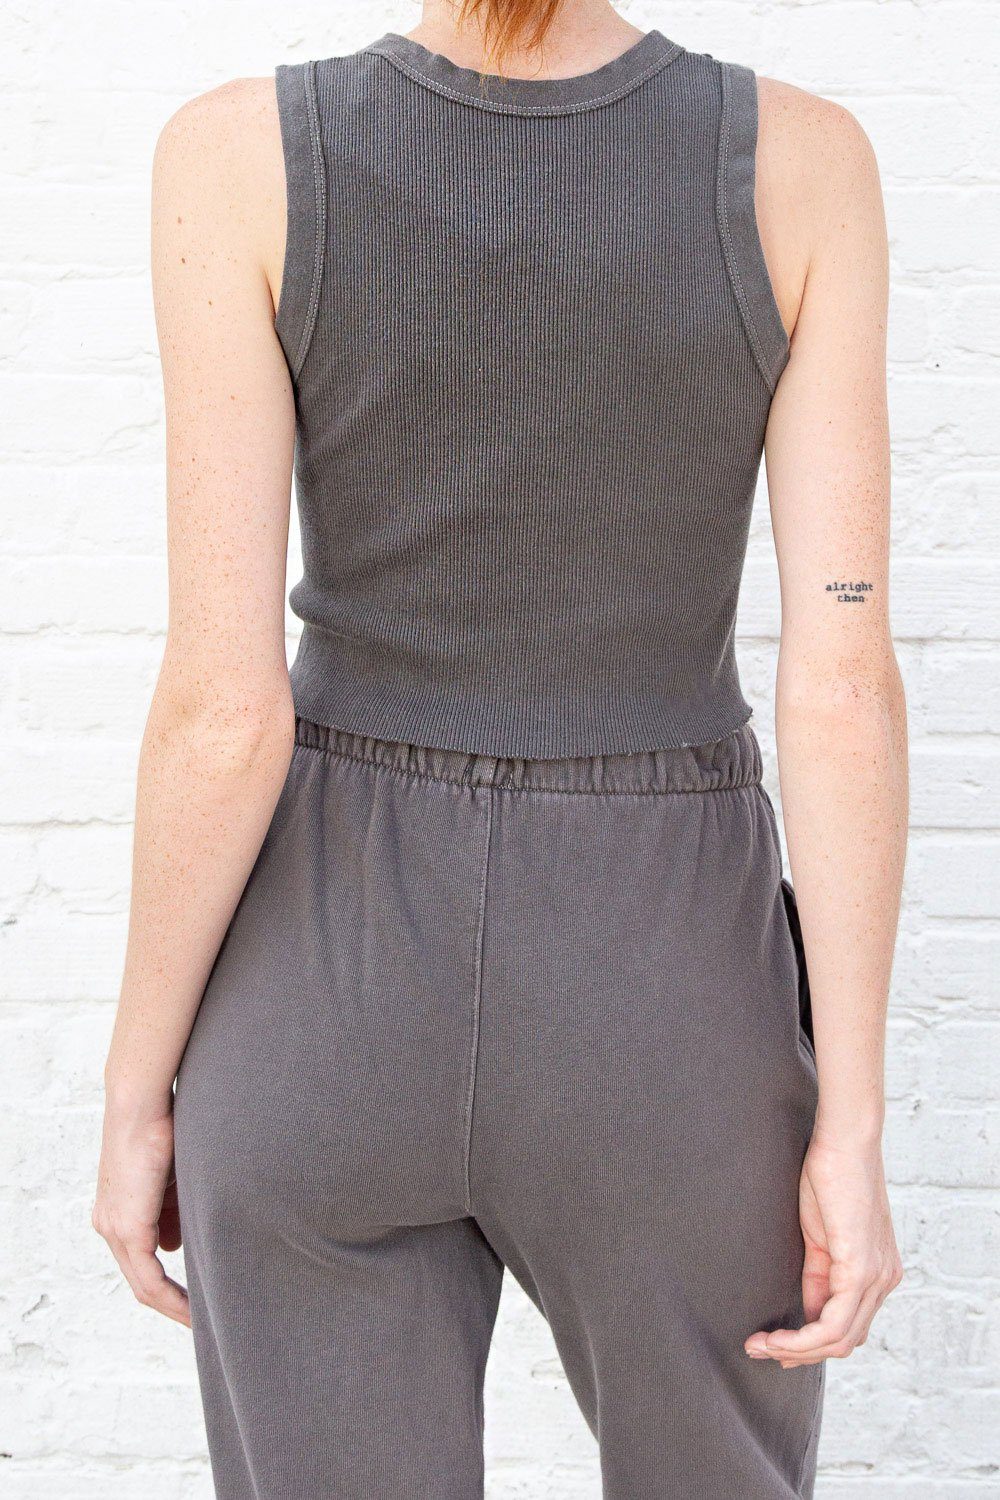 Brandy Melville Brown Connor Tank Top Size undefined - $8 - From Anissa